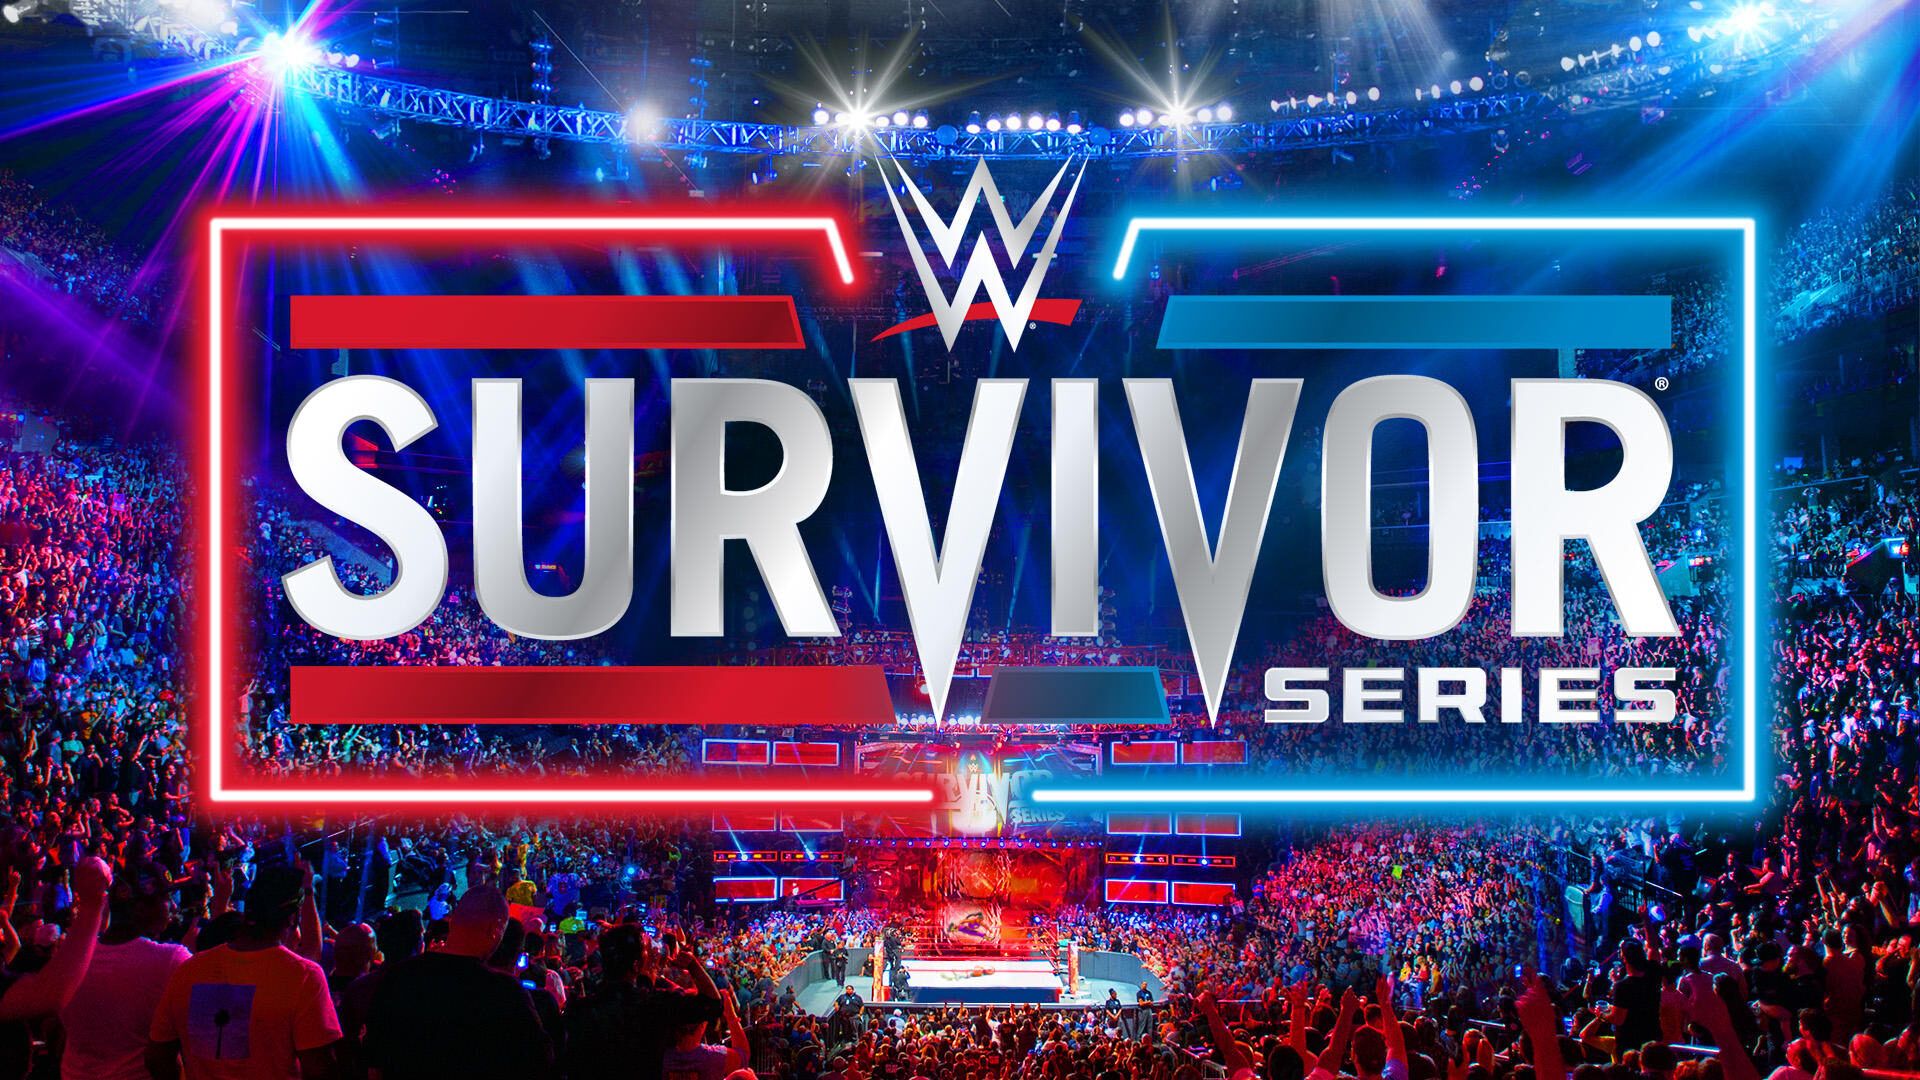 WWE Survivor Series is due to take place on November 26